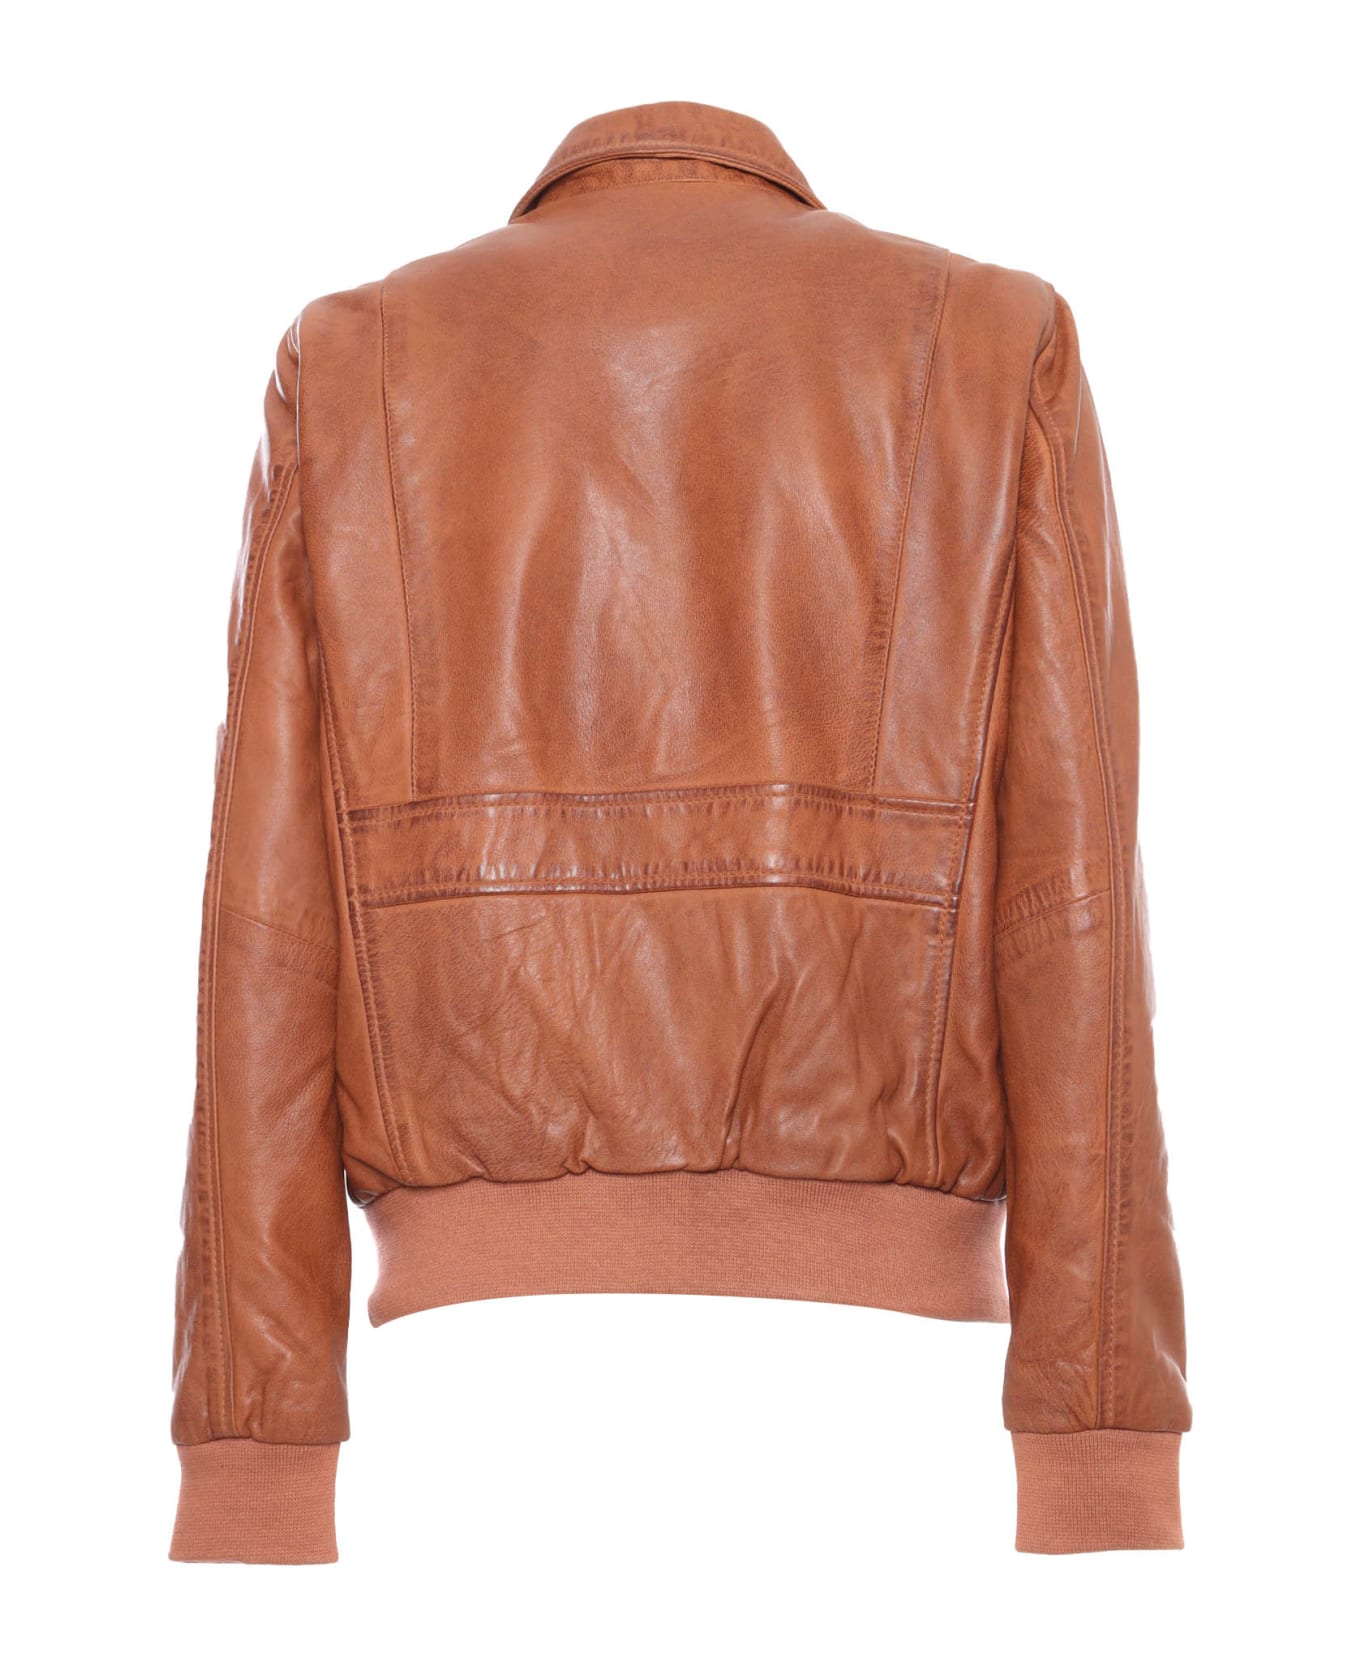 Schott NYC Camel Colored Leather Jacket - BROWN